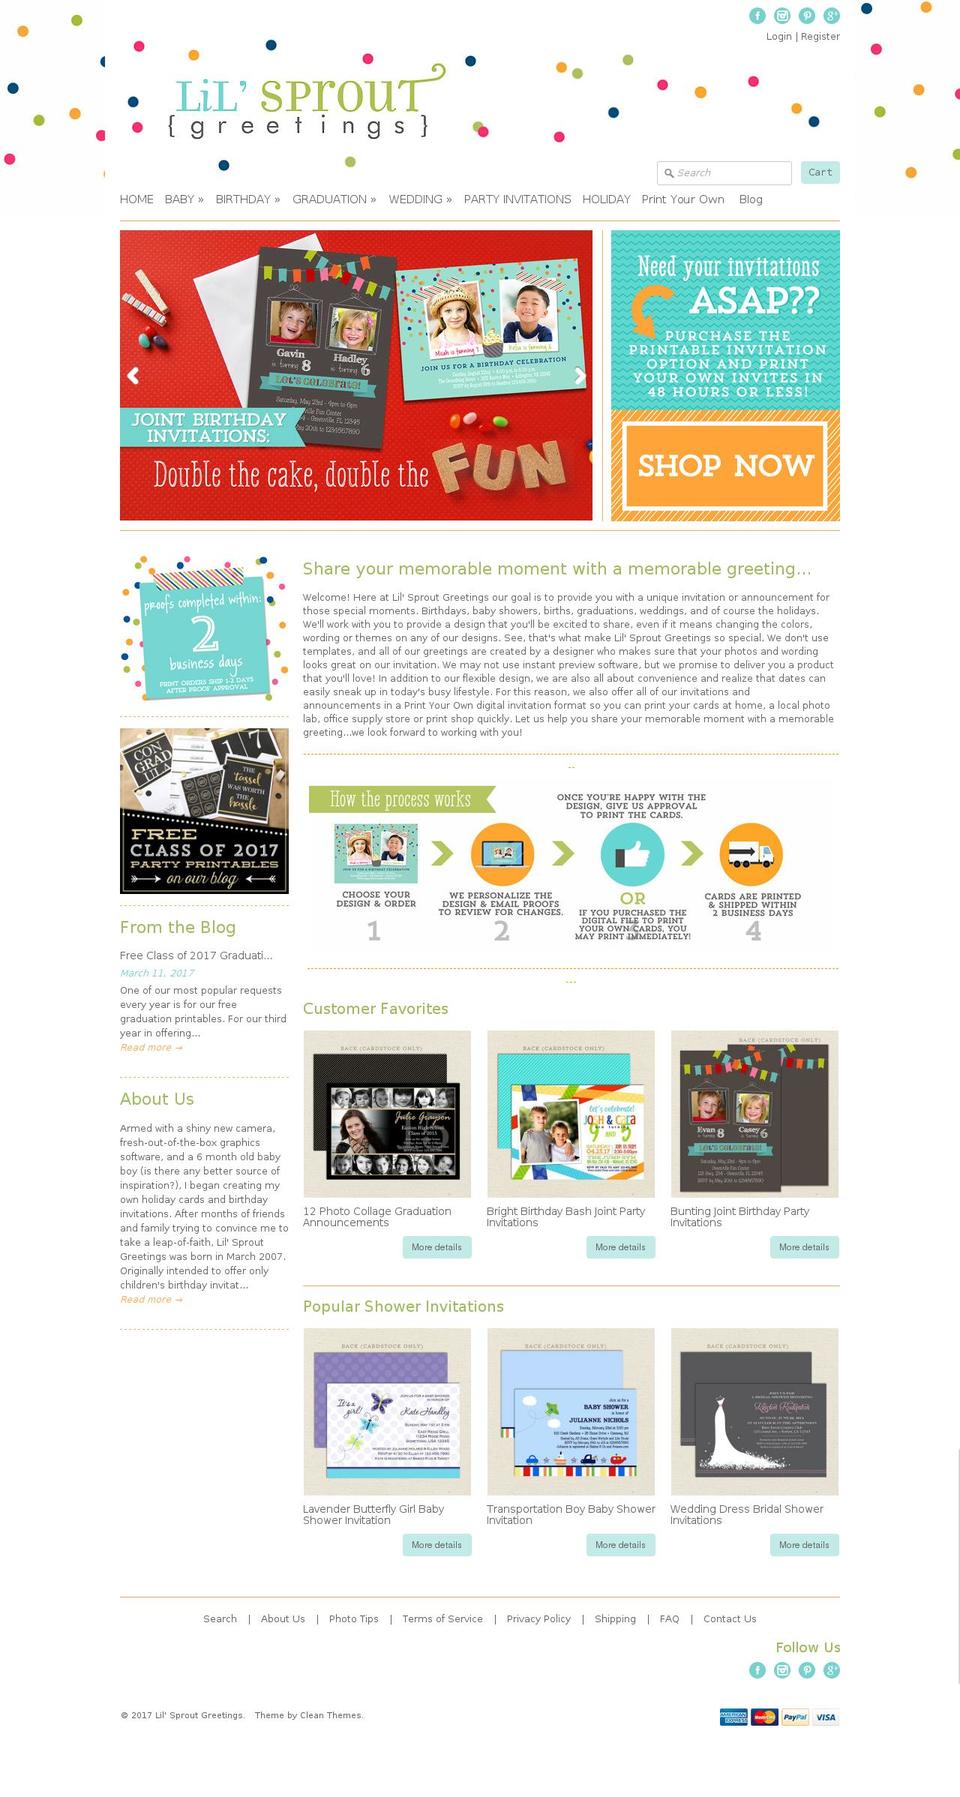 Expression Shopify theme site example lilsproutgreetings.com